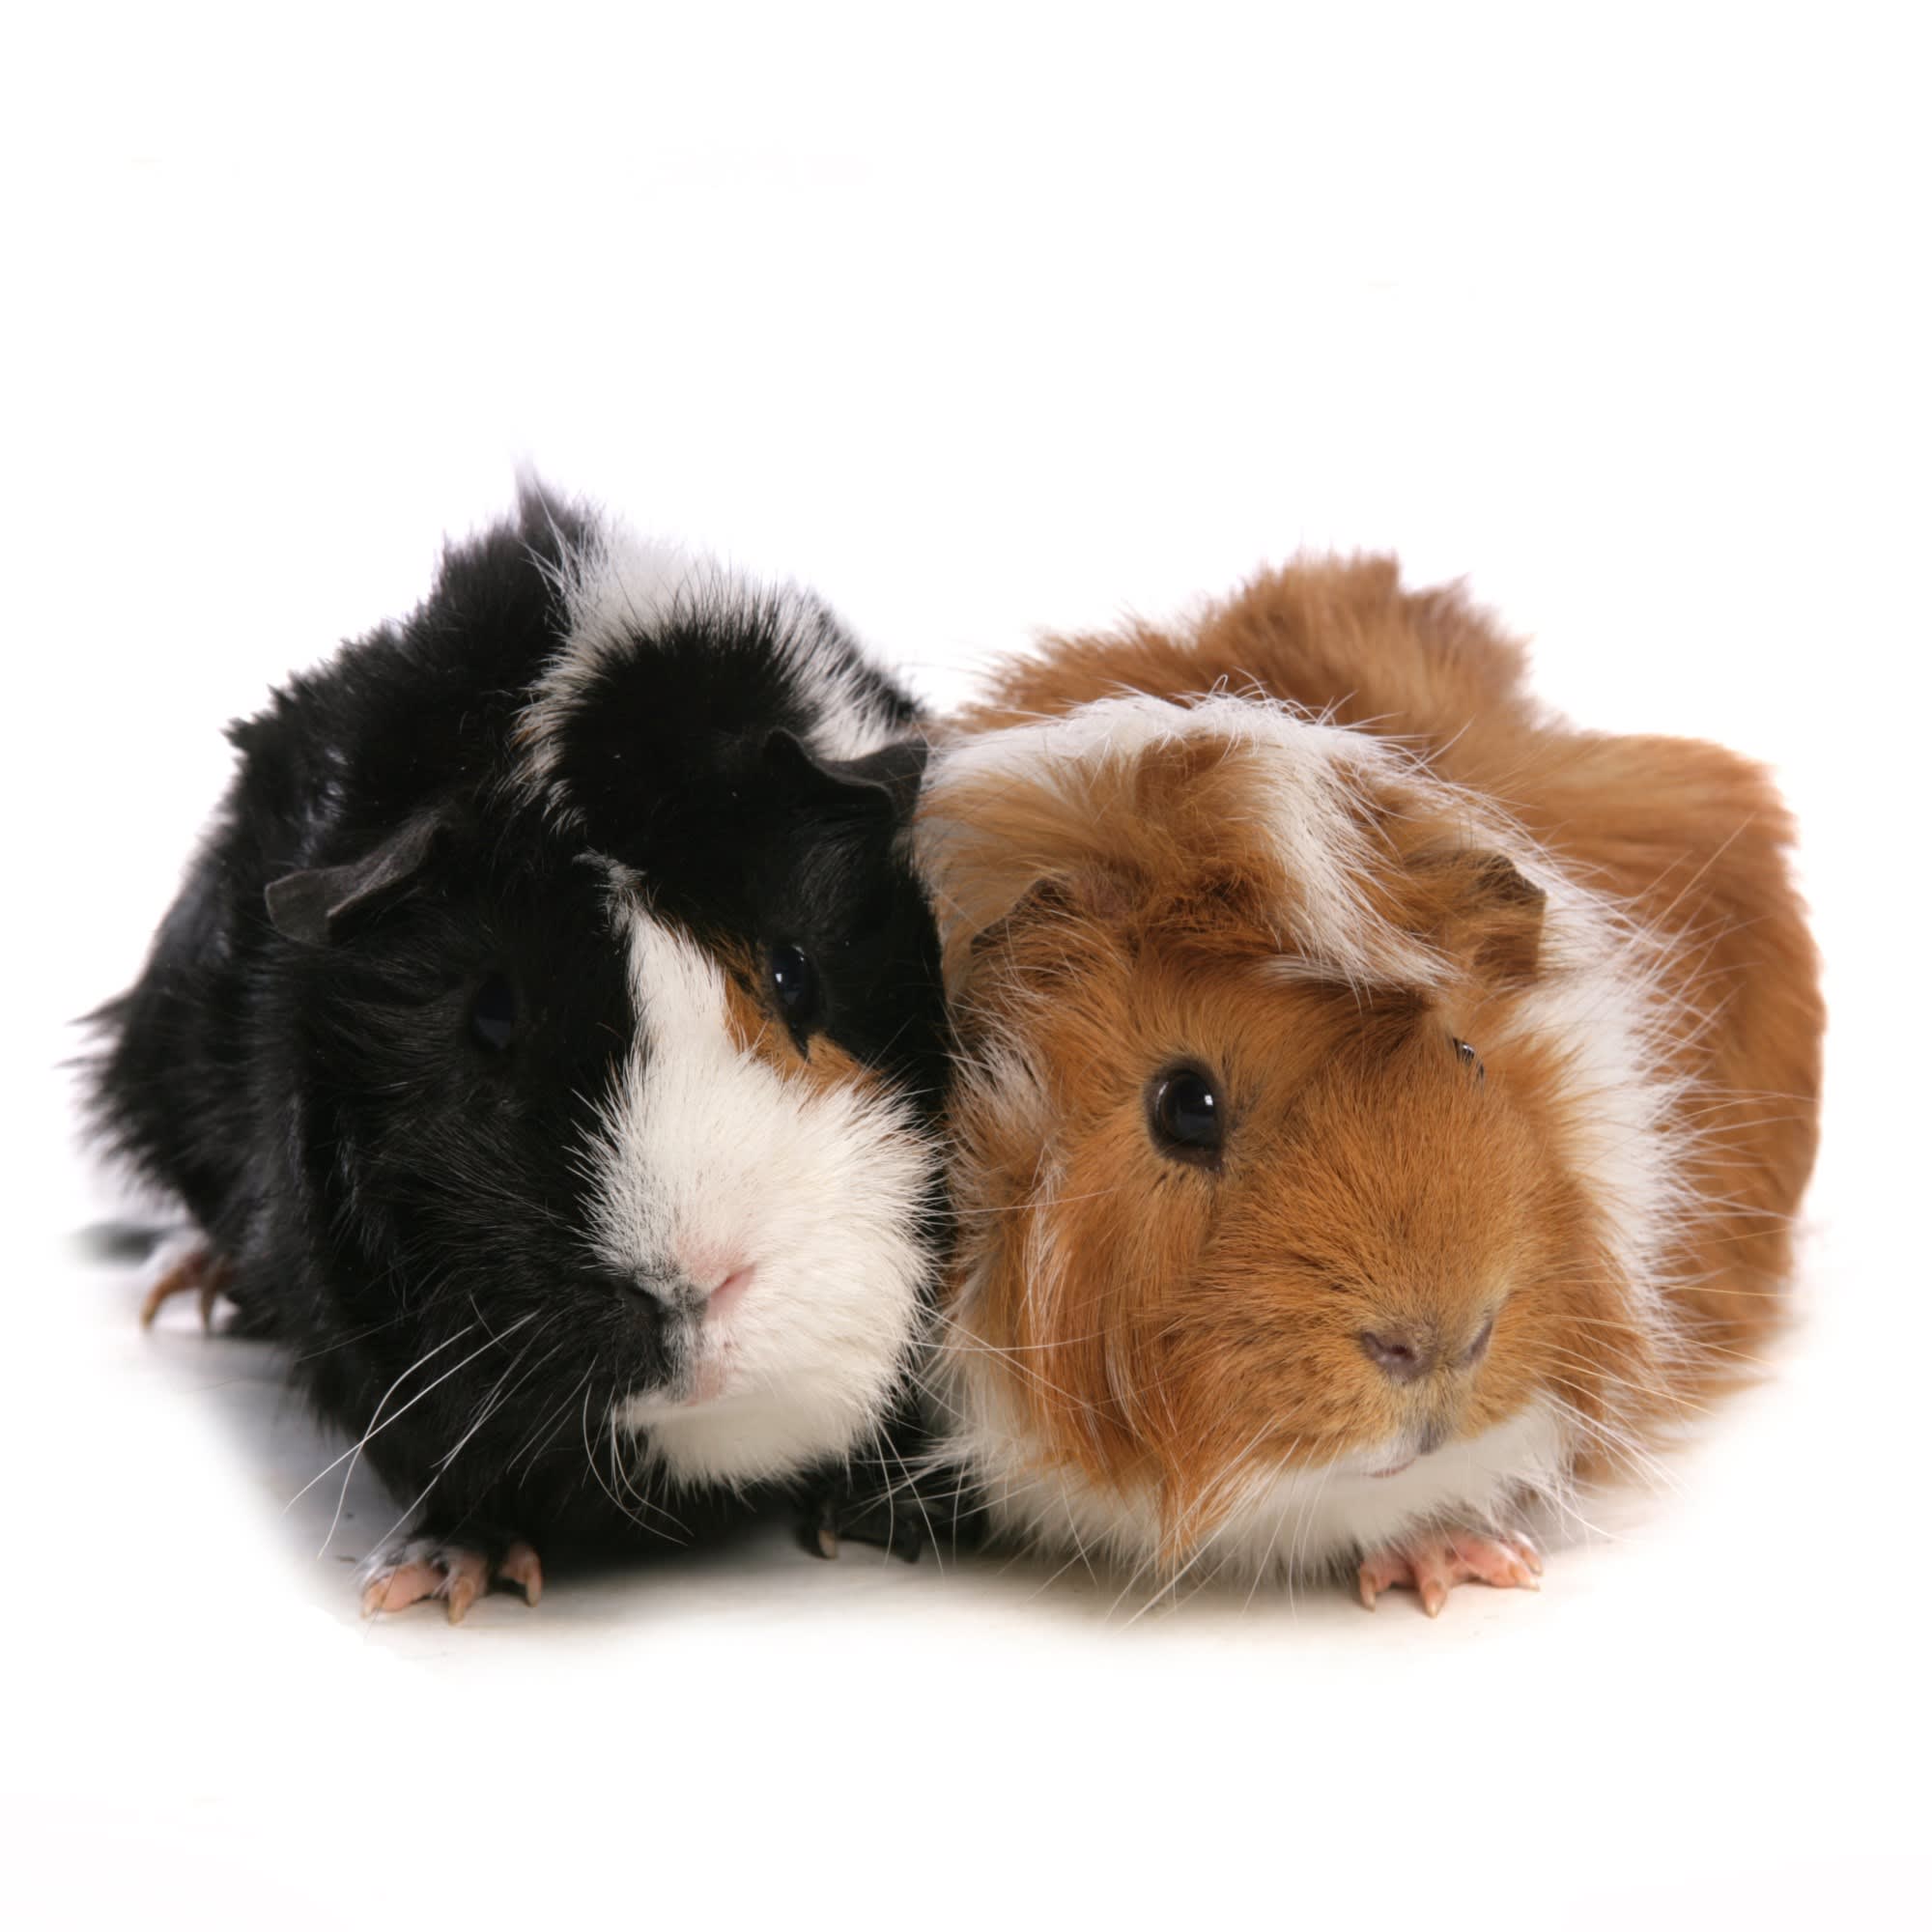 This Interactive Guinea Pig Delivers 3 Adorable Pet Babies - The Toy Insider